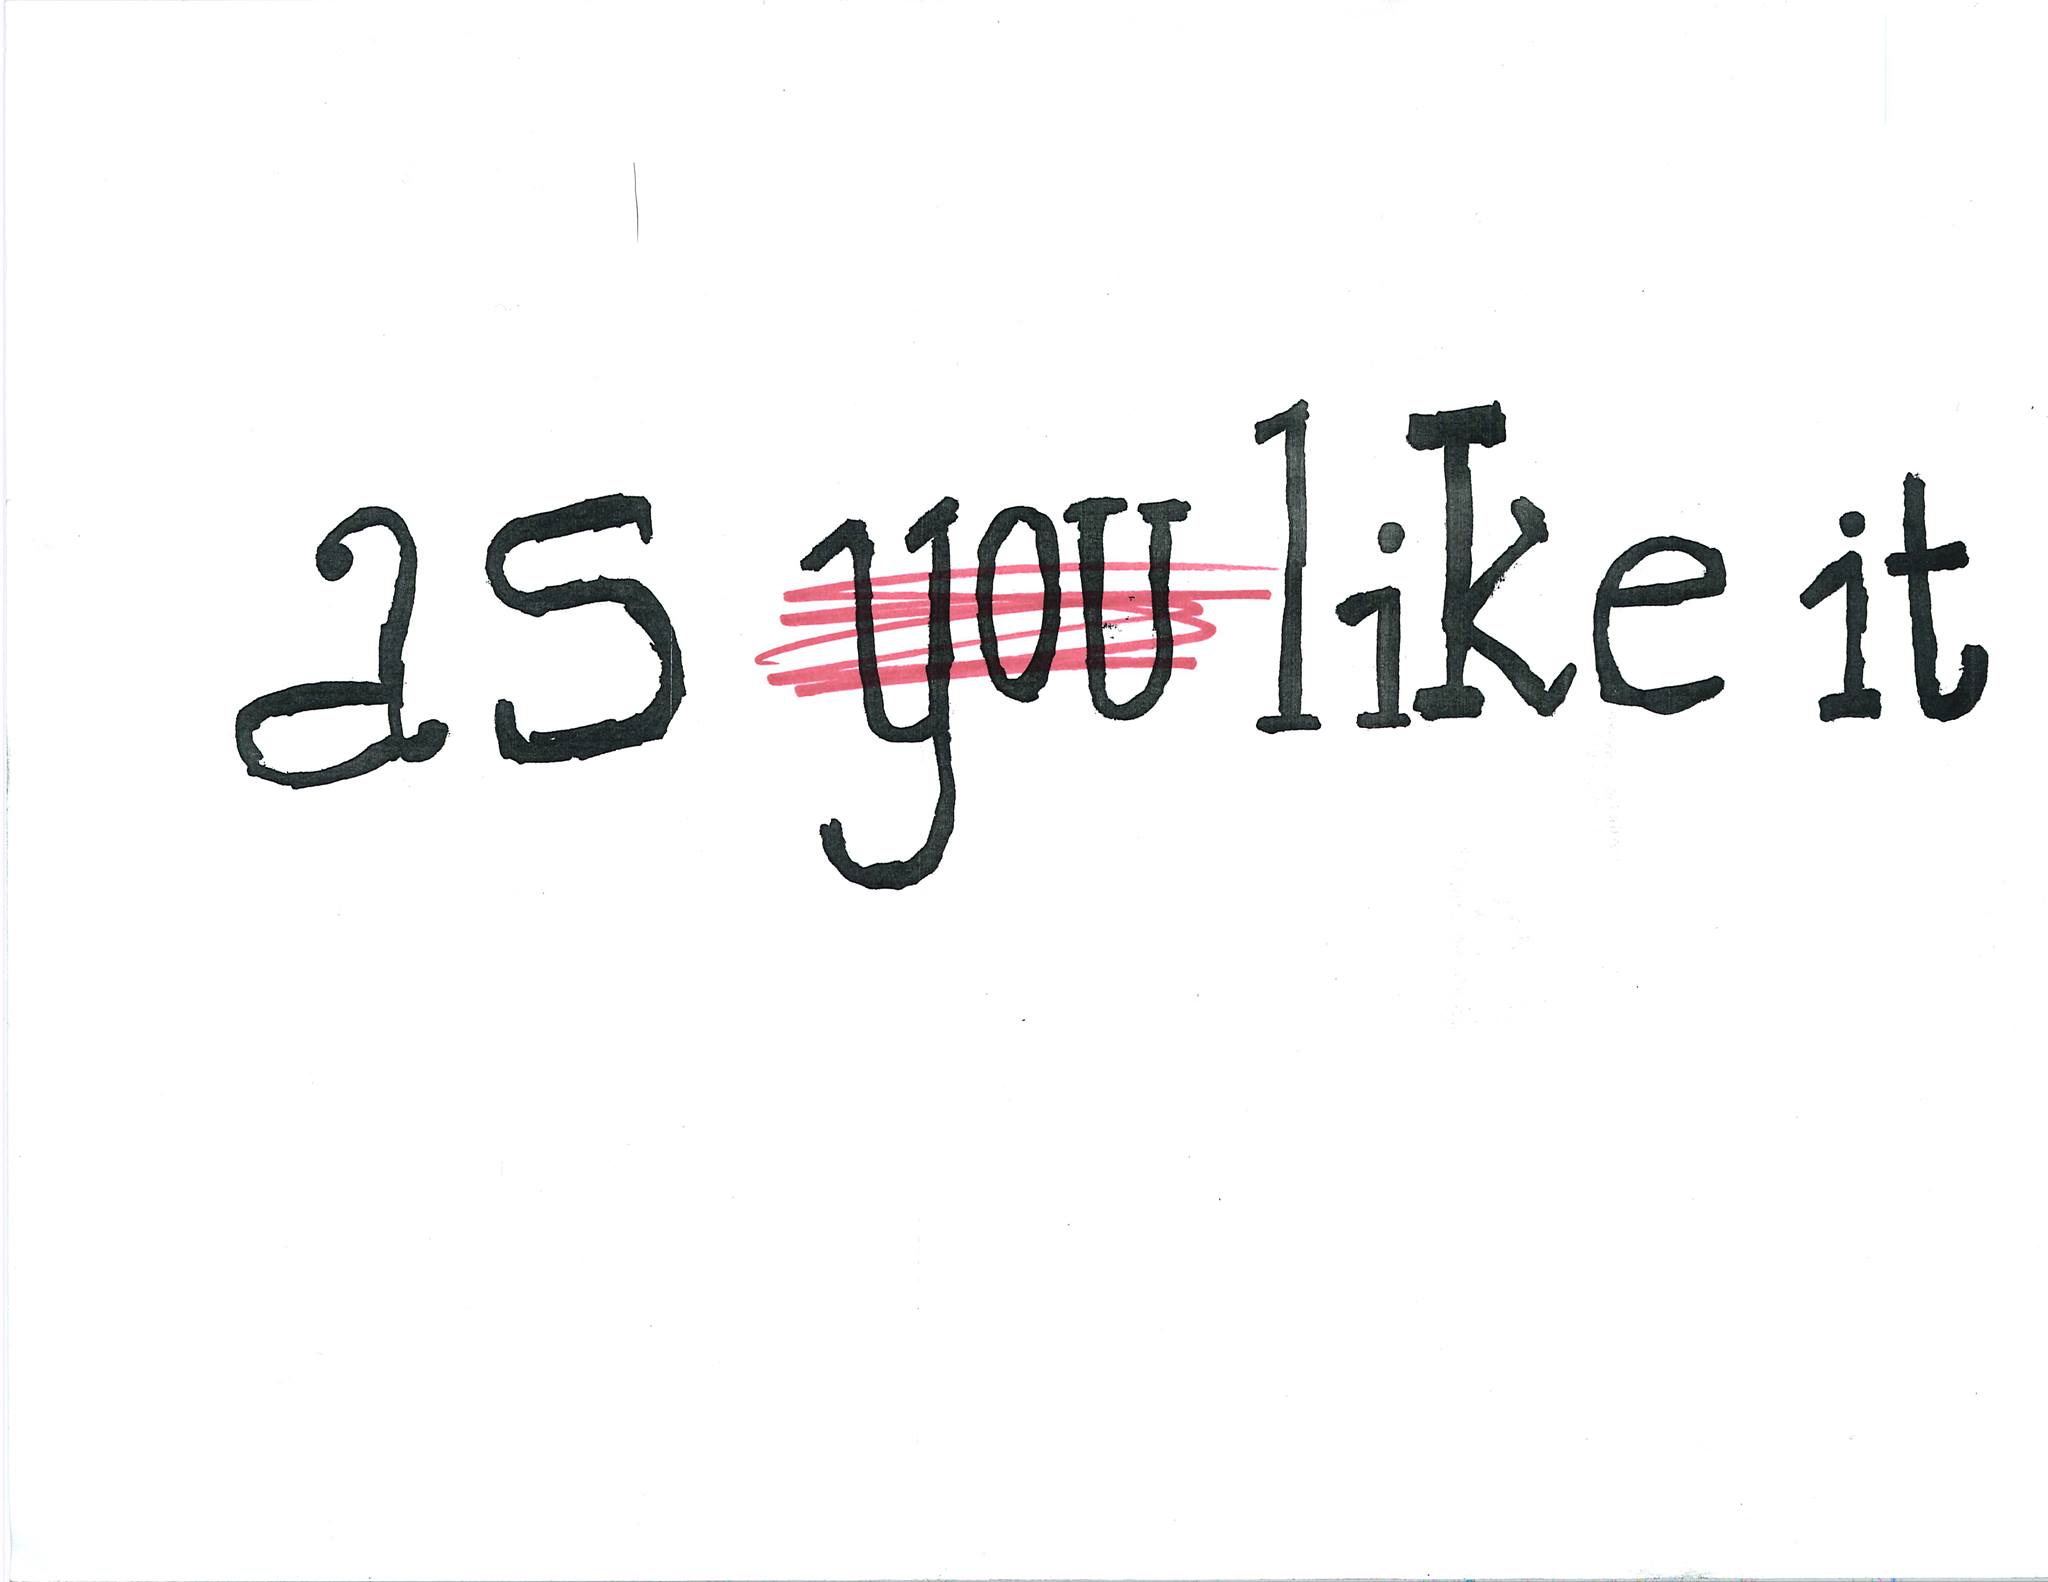 as you like it written in black text on white background, with you scribbled over in red